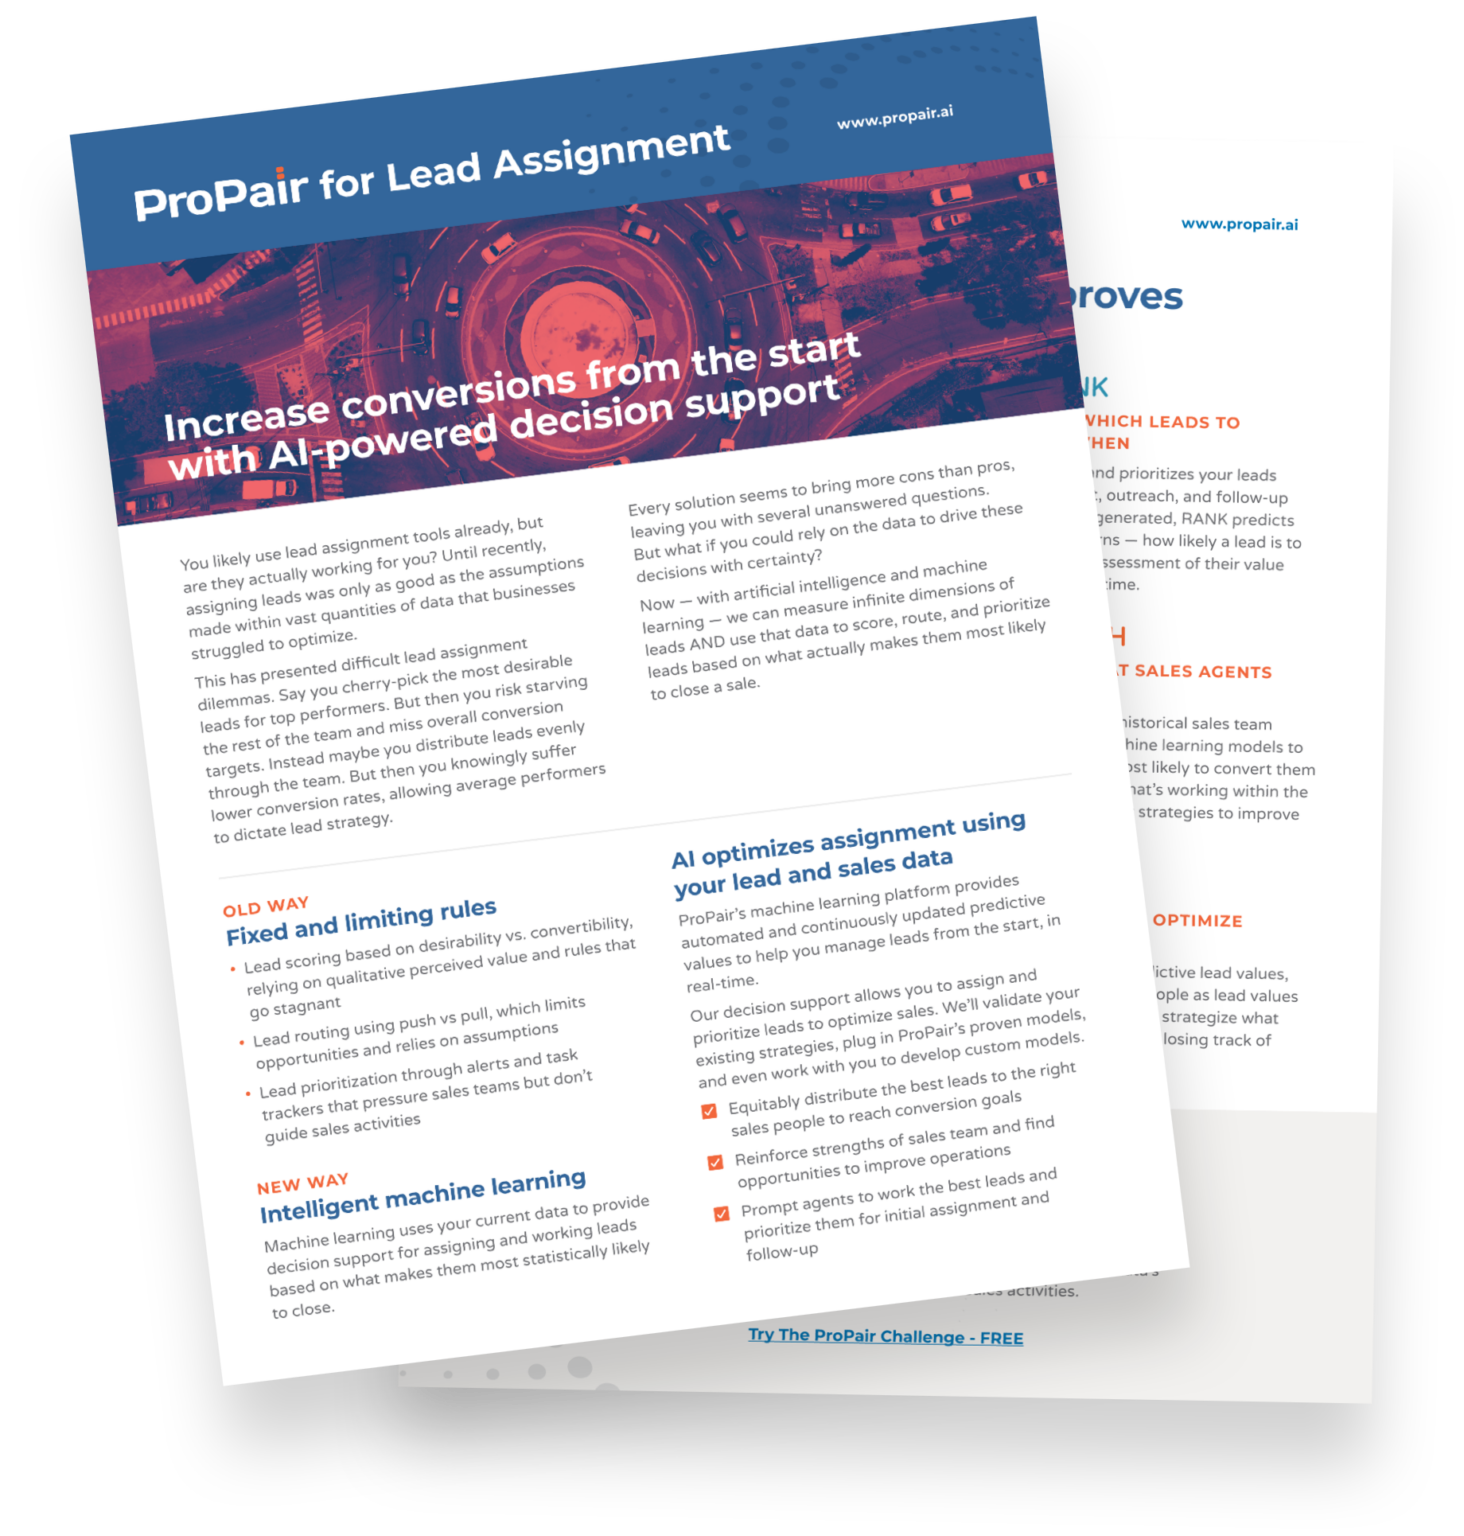 lead assignment best practices